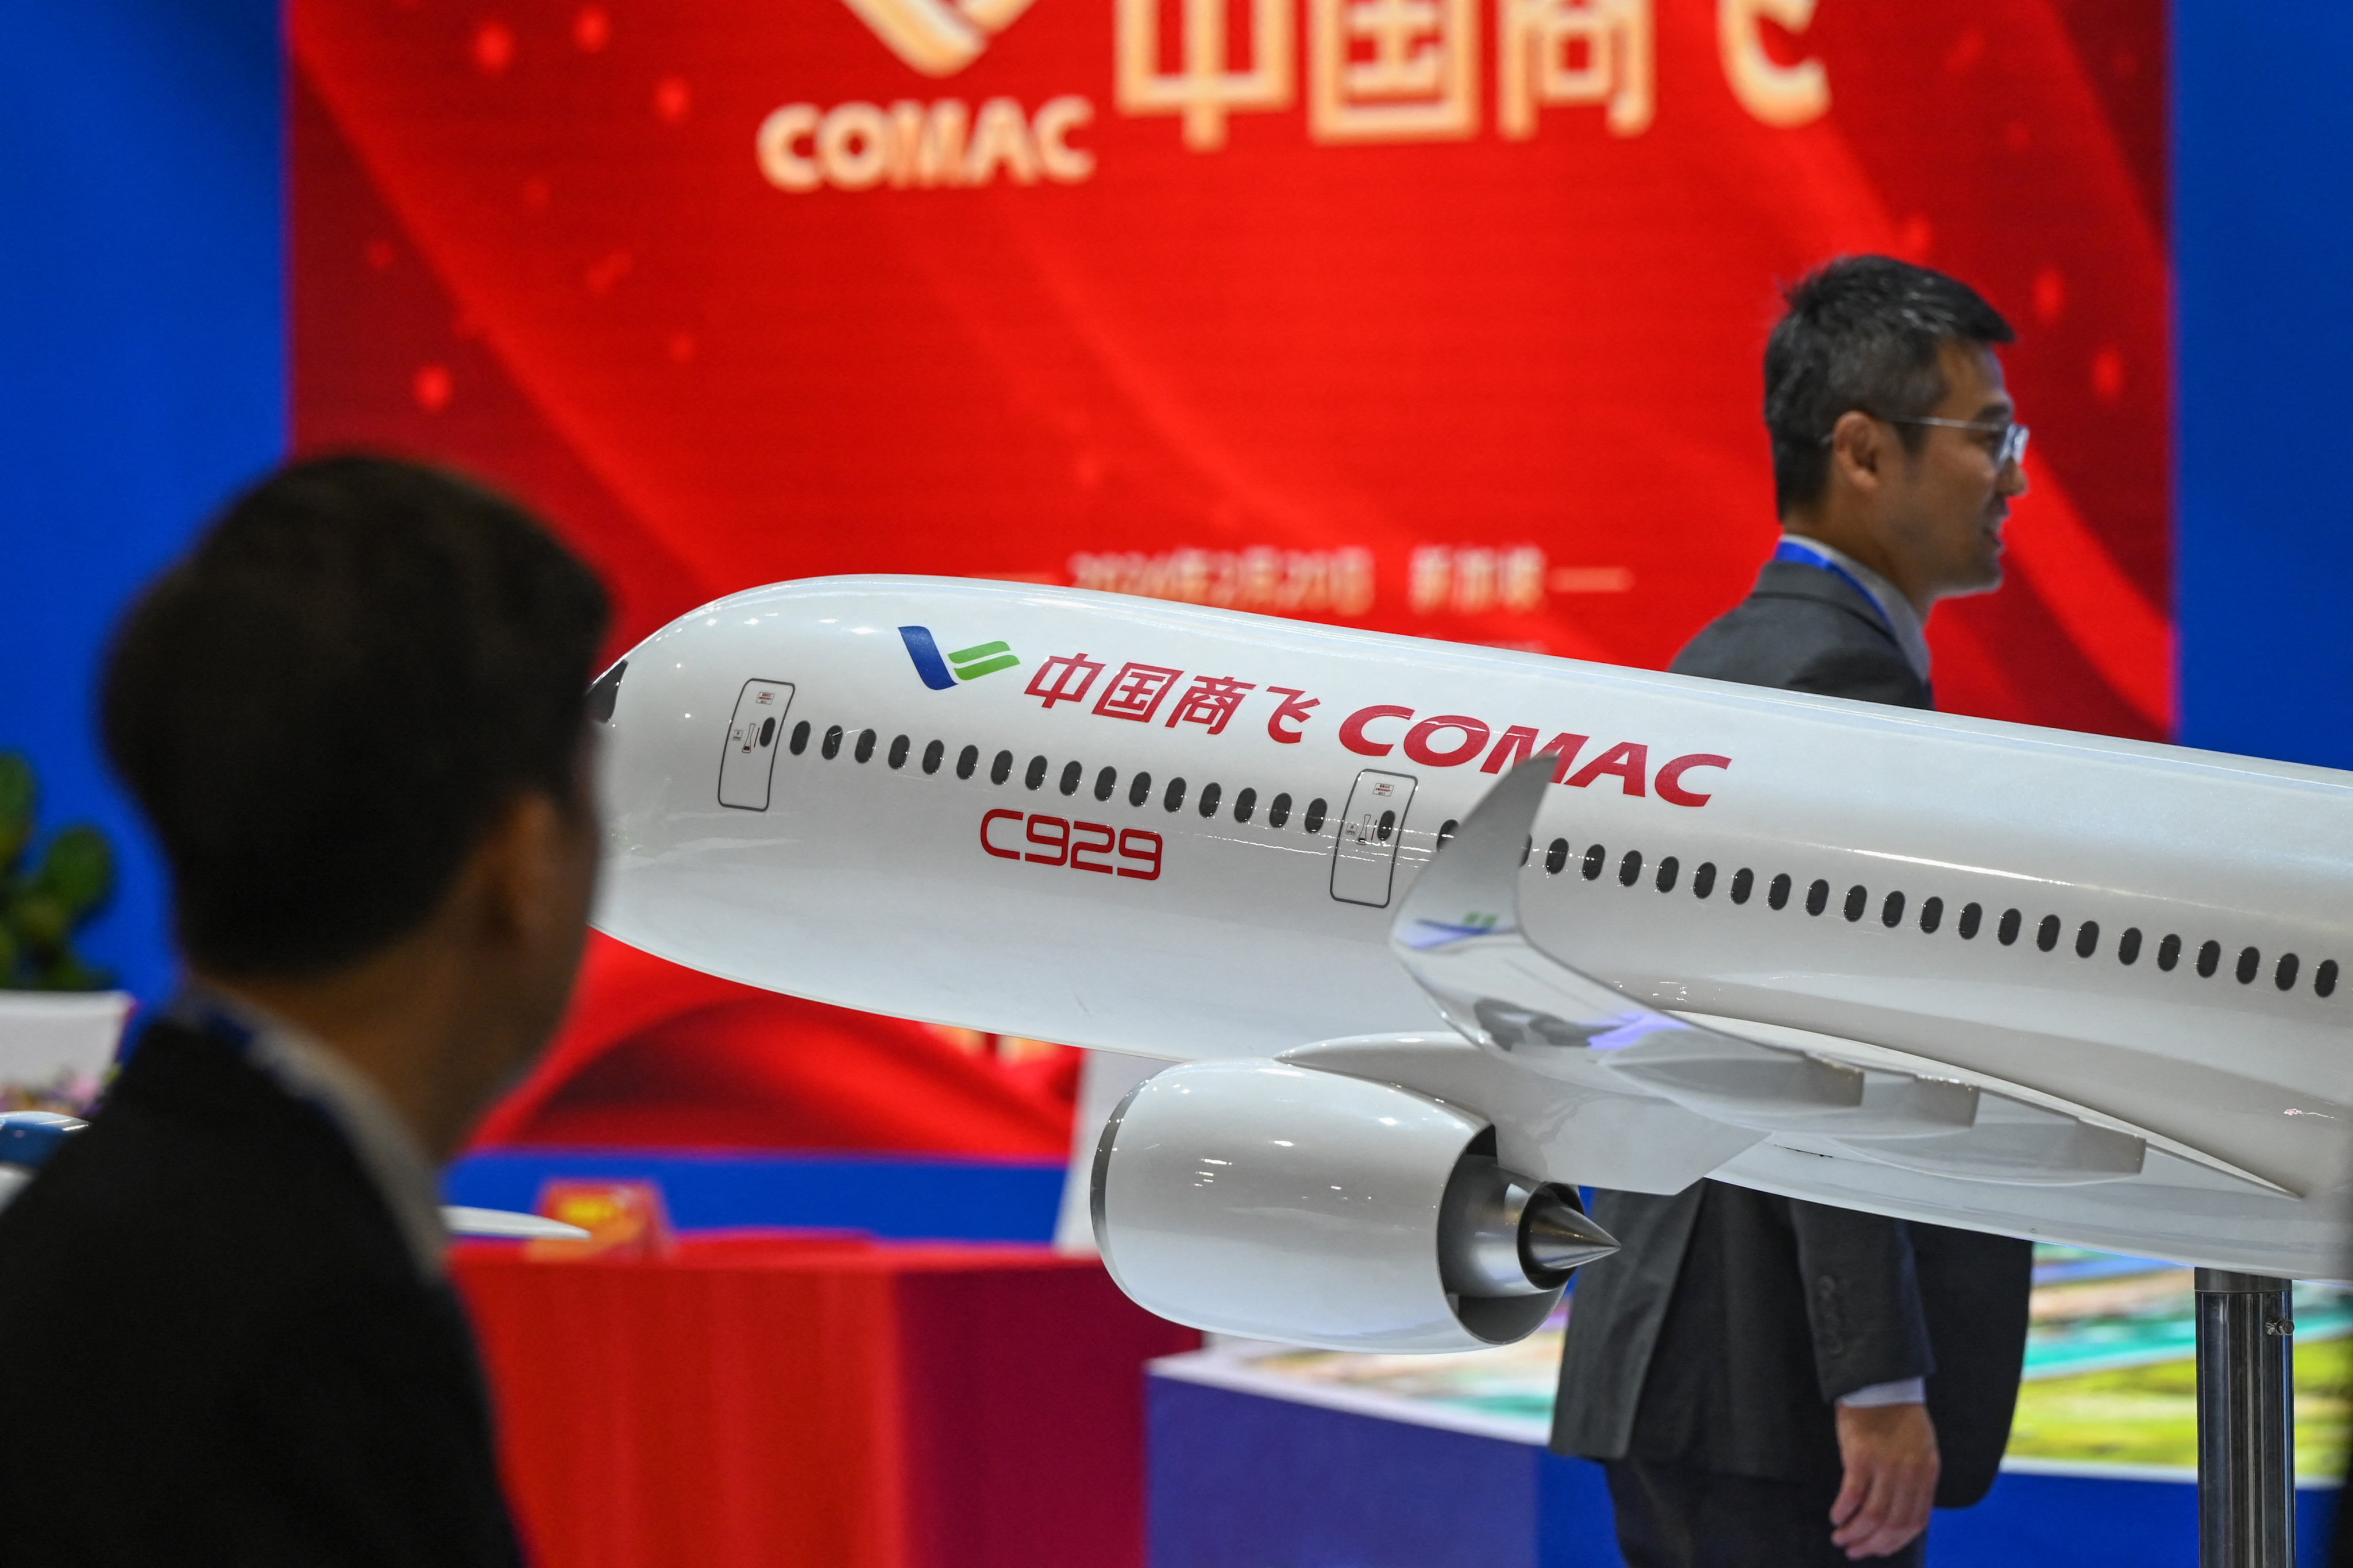 The C929 would have around 280-400 seats and a range of 12,000km (7,456 miles), according to Comac. Photo: AFP